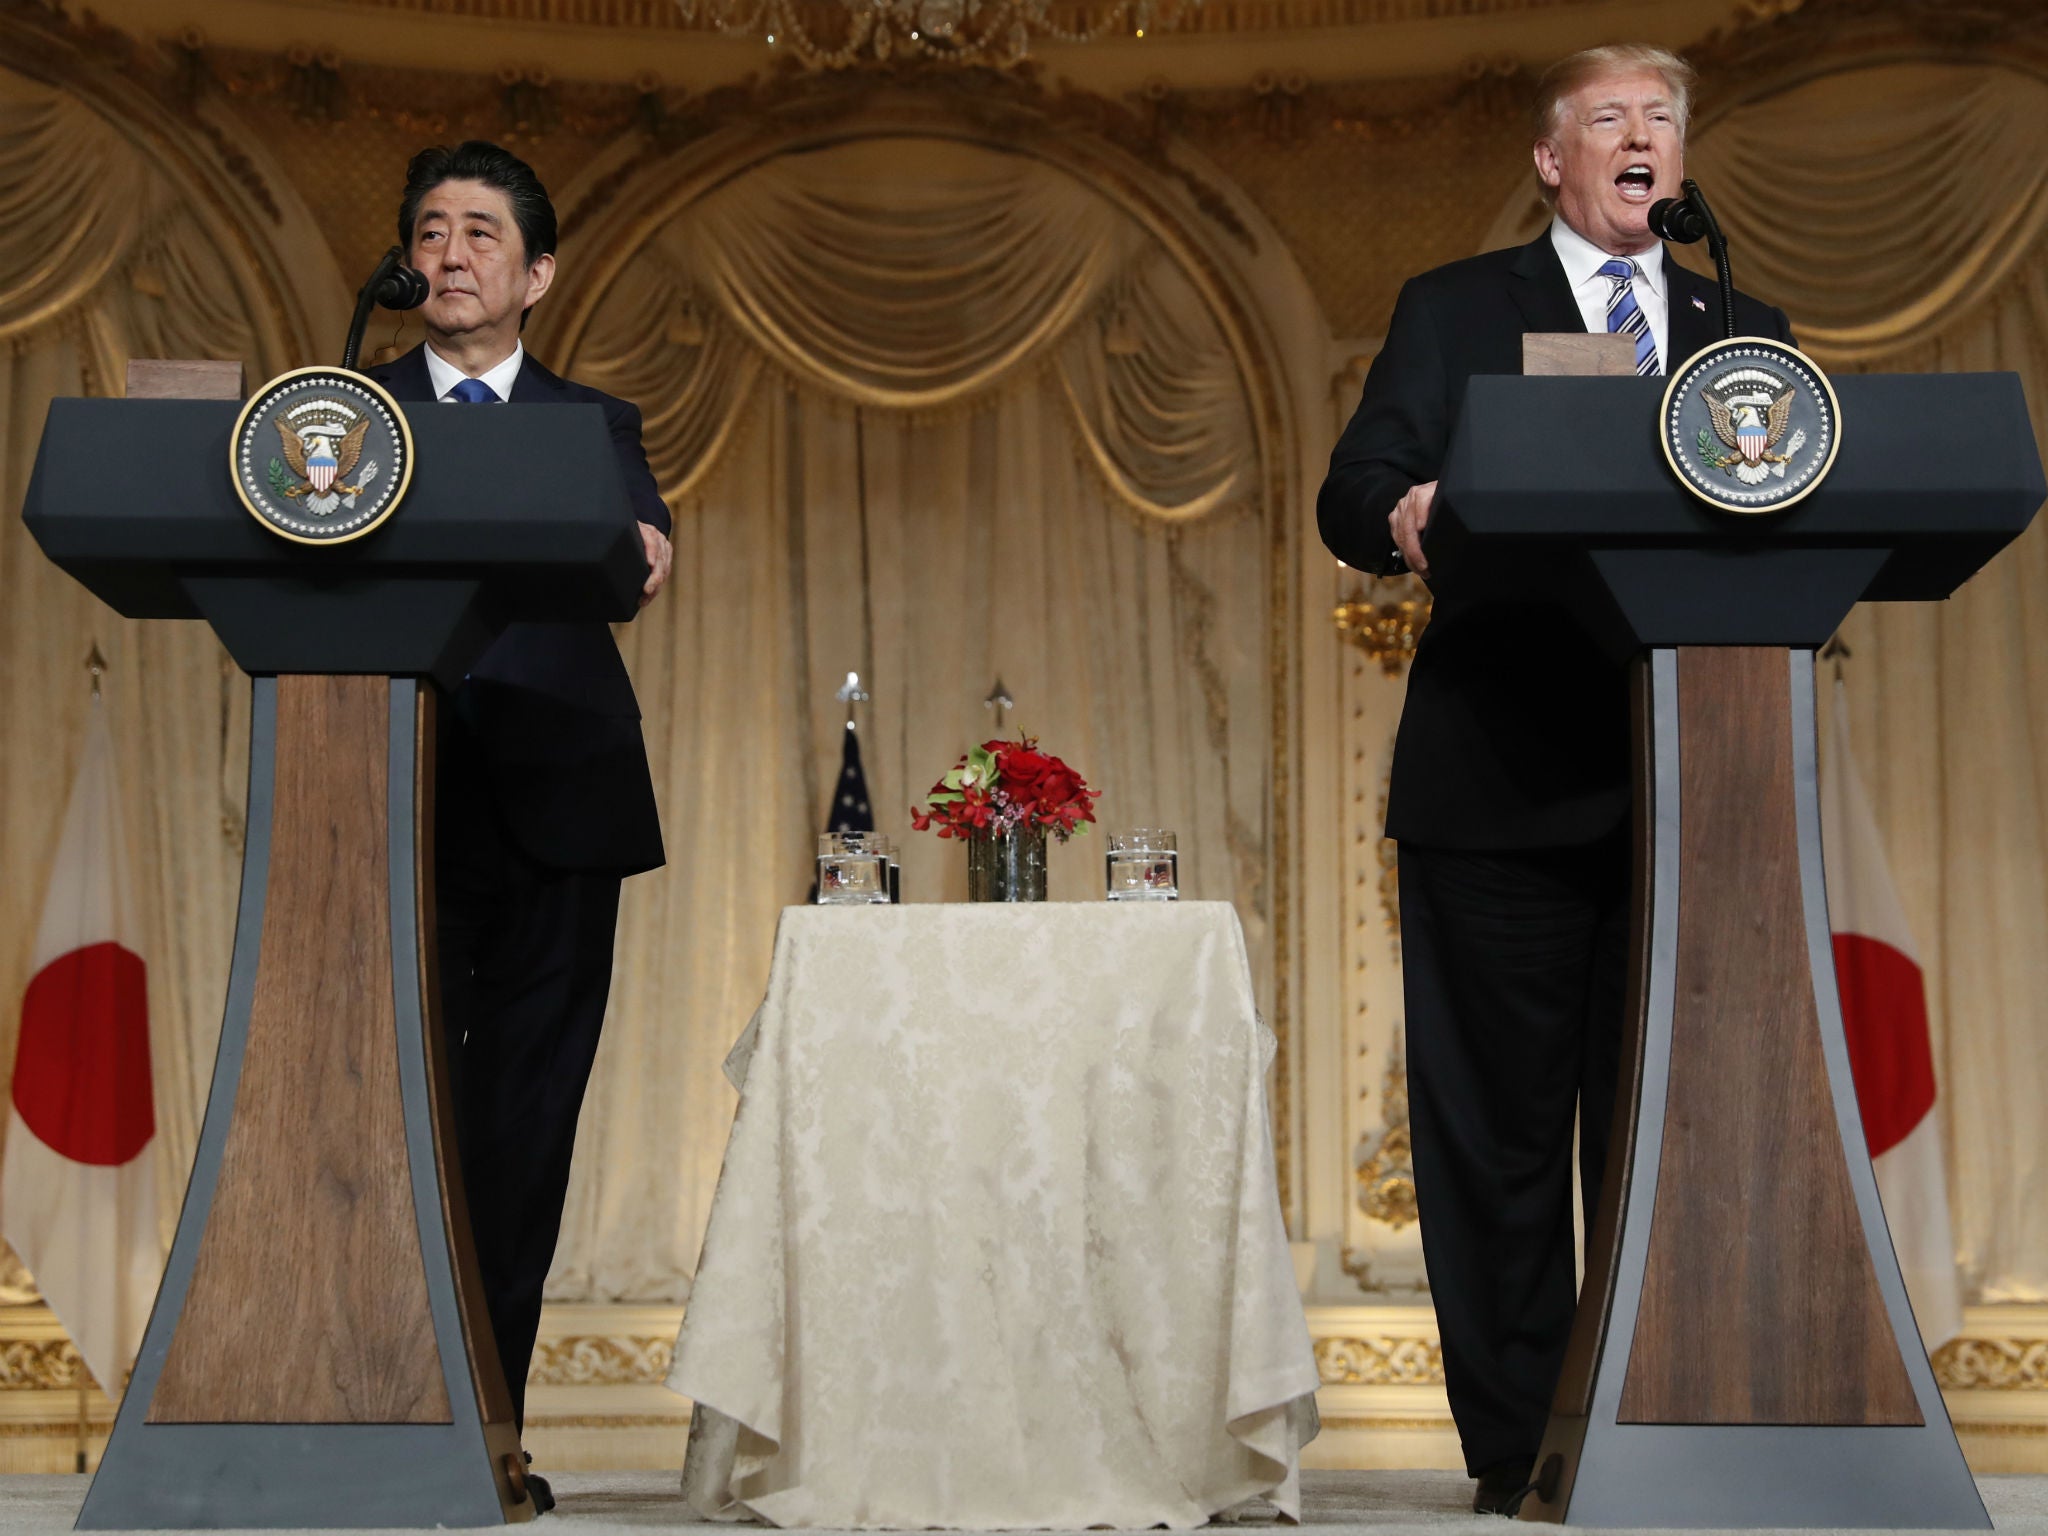 Donald Trump and Shinzo Abe speak during a news conference at Trump's private Mar-a-Lago club in Palm Beach, Florida